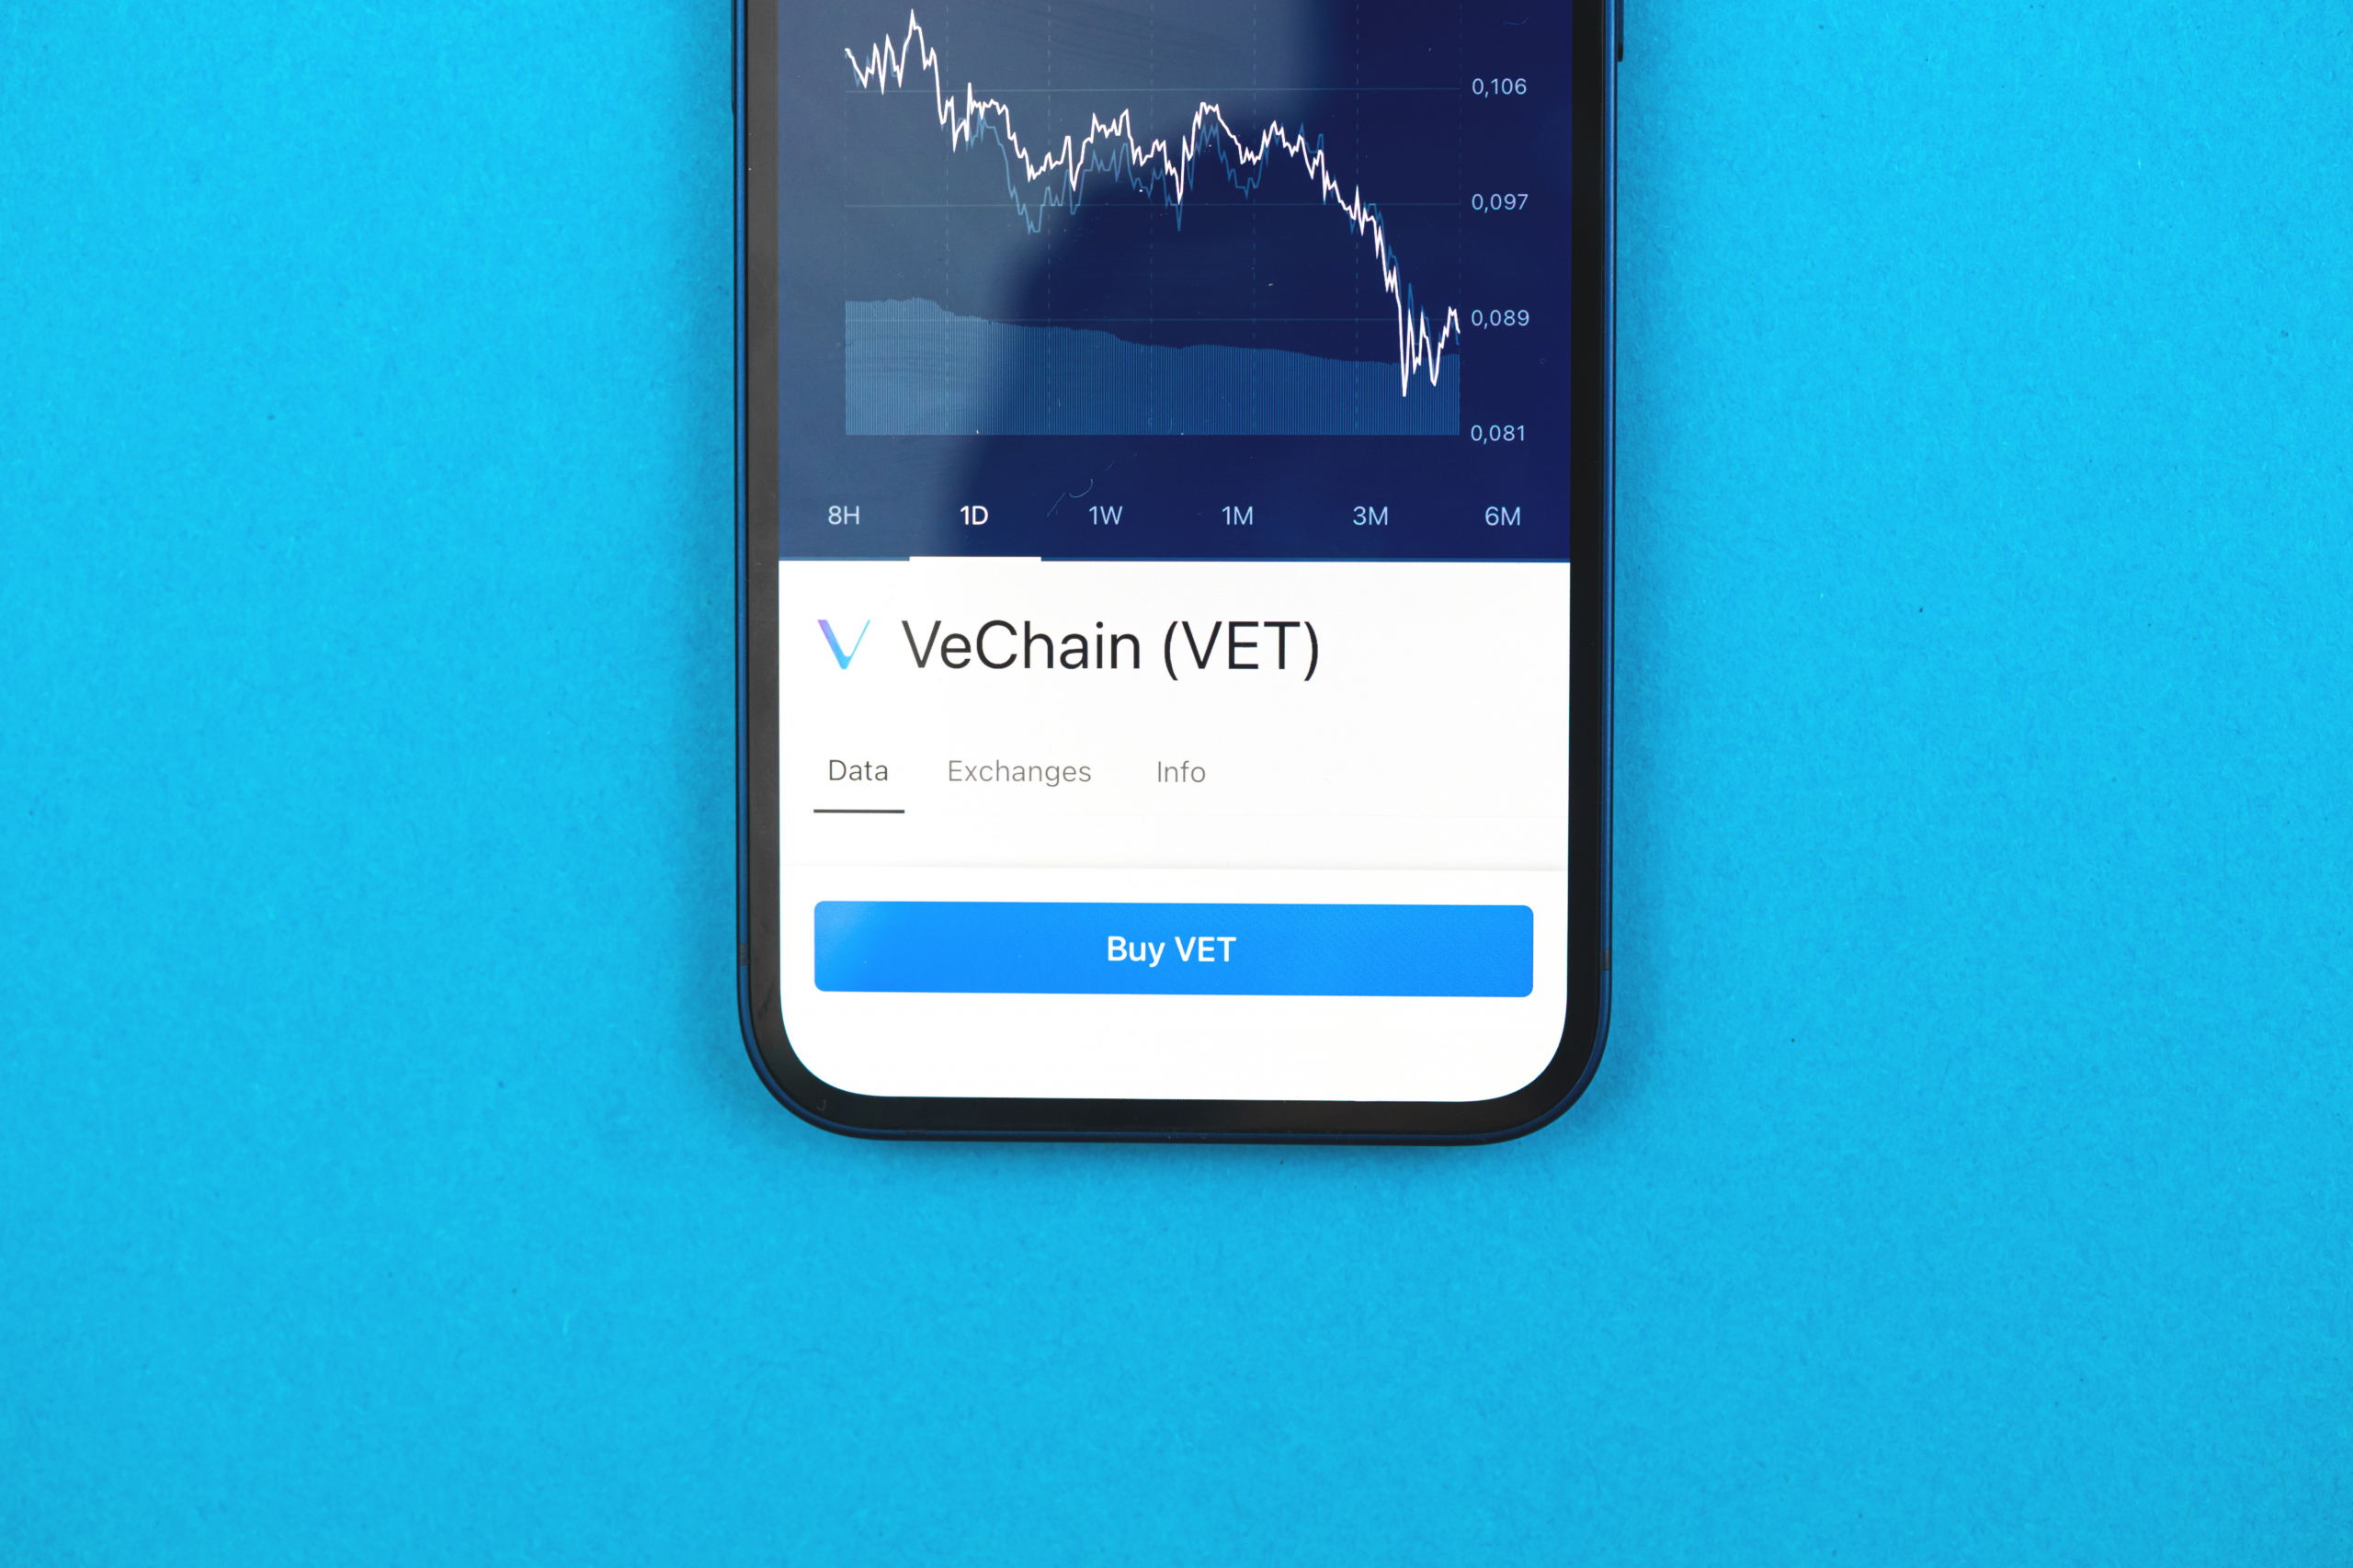 VeChain can now be used as a payment method in 2 million stores
